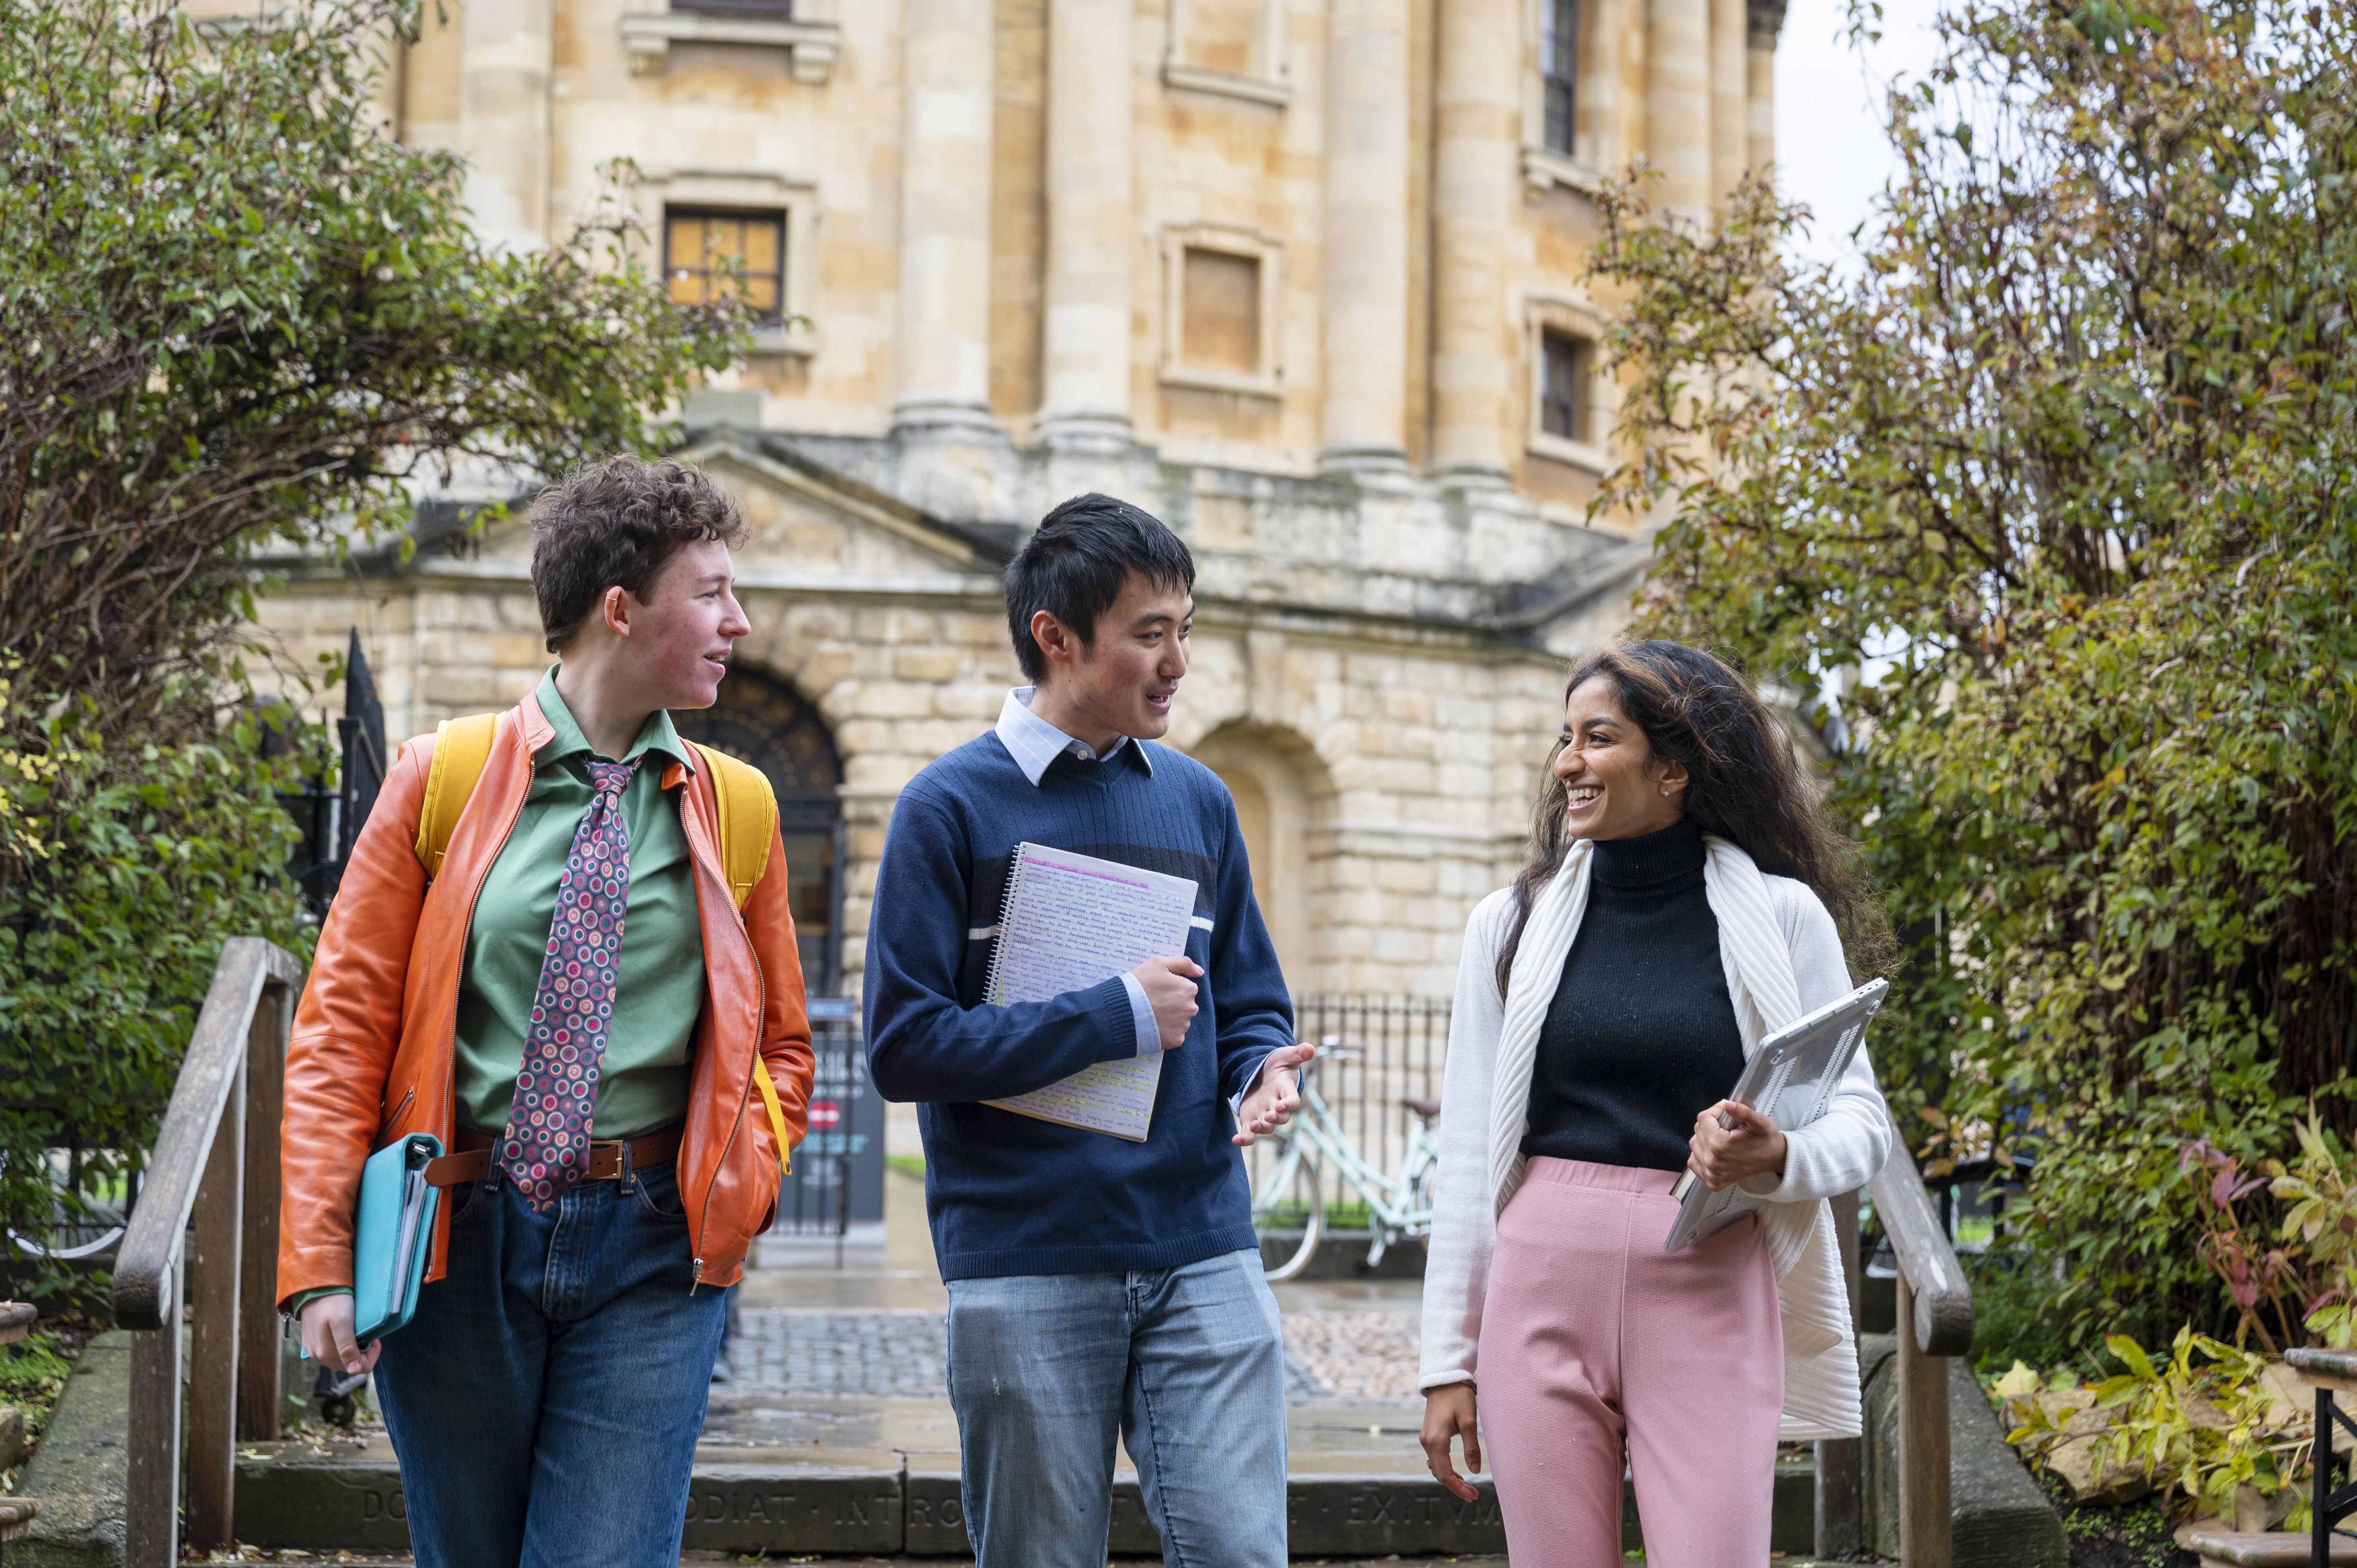 Three students walking and talking (© University of Oxford Images / John Cairns Photography)